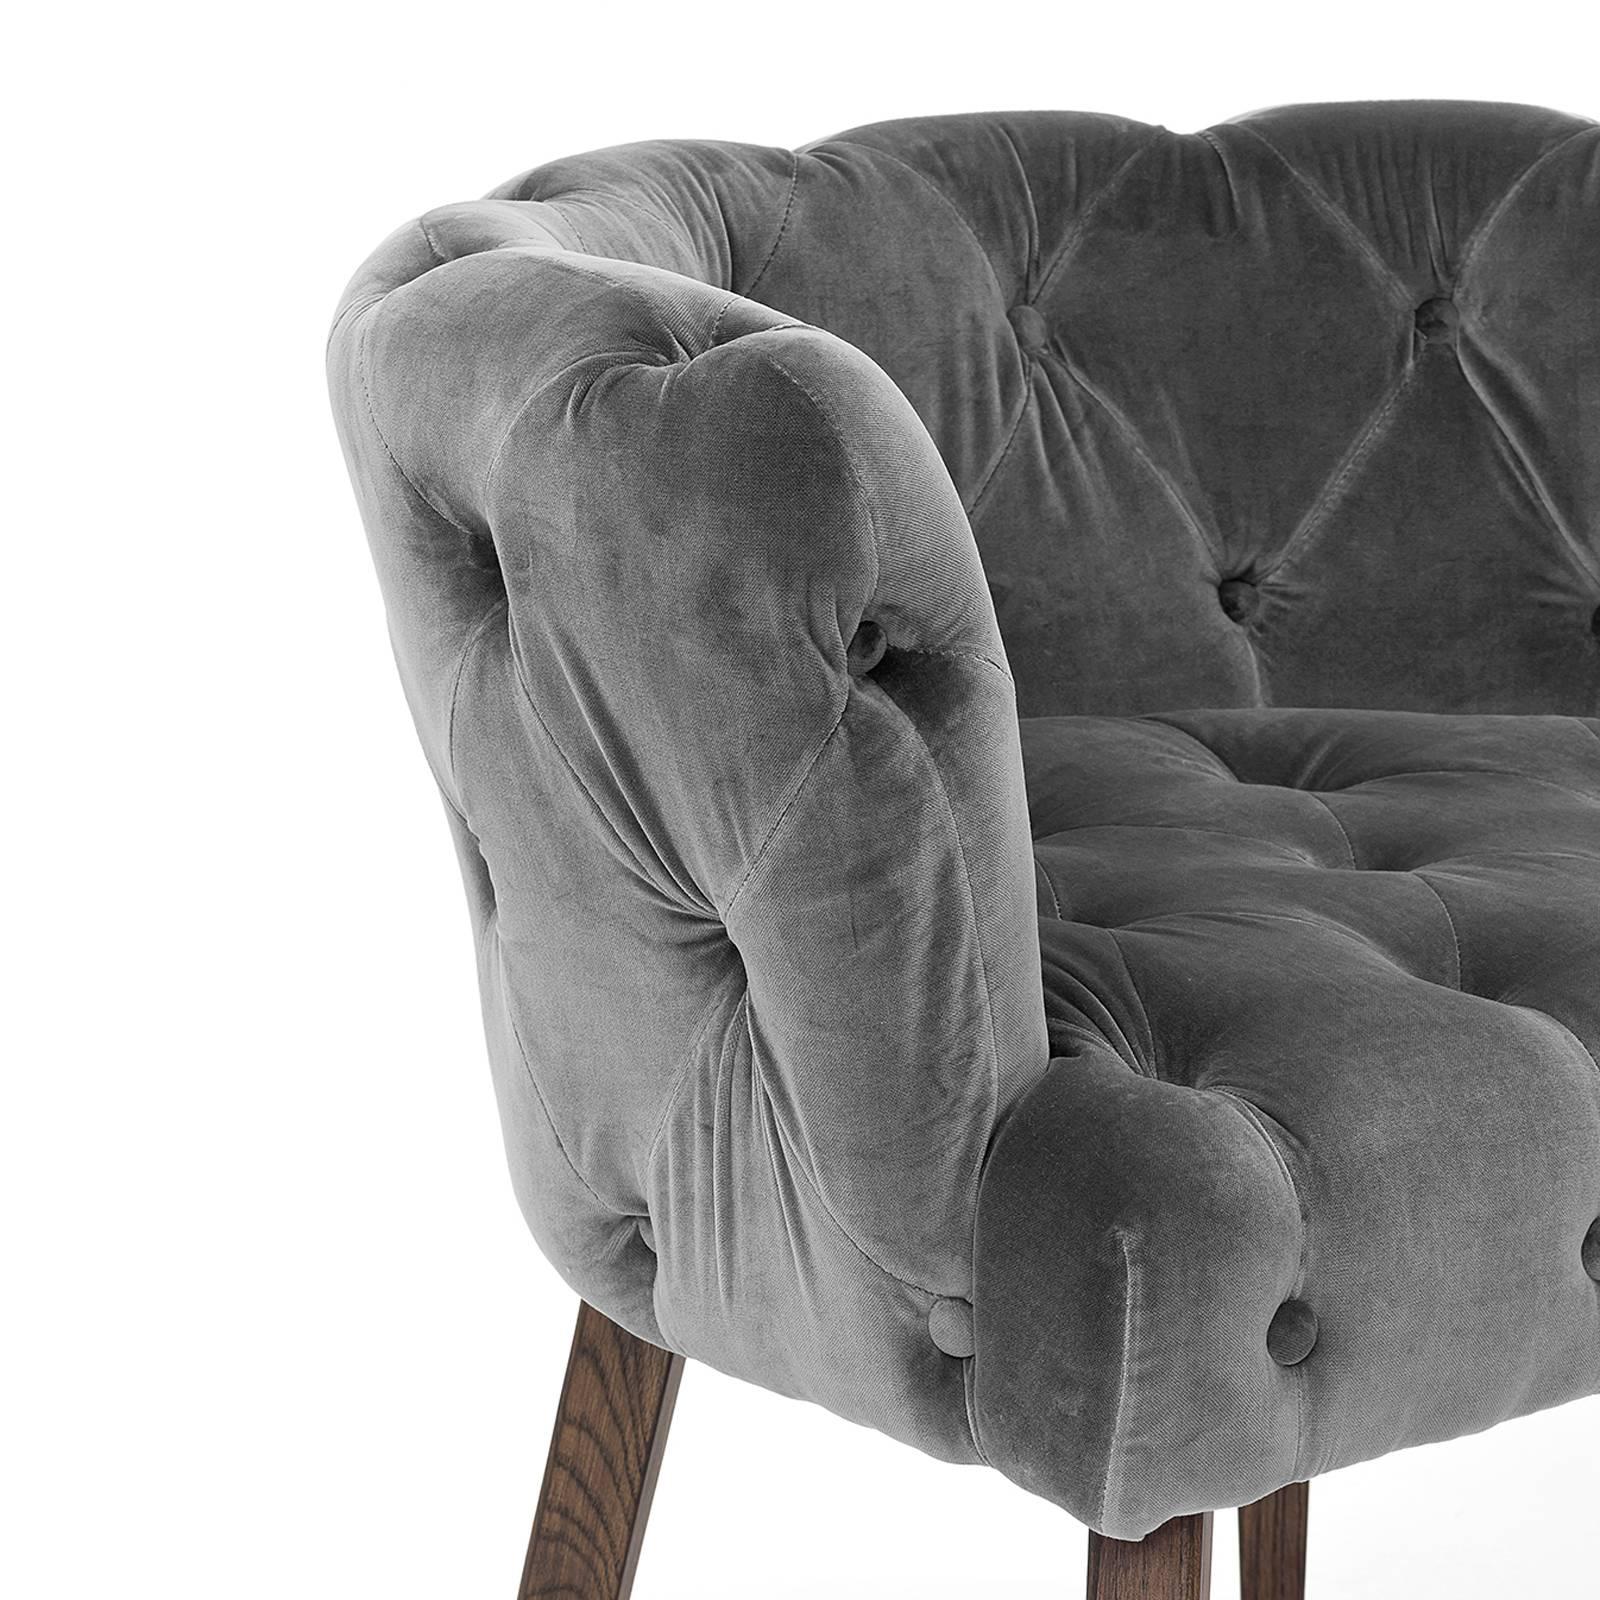 Home Capiton chair upholstered in grey capitonated
velvet fabric with brown solid wood legs.
Also available with purple capitonated velvet fabric with
brown solid wood legs or with black capitonated
velvet fabric with black solid wood legs.
